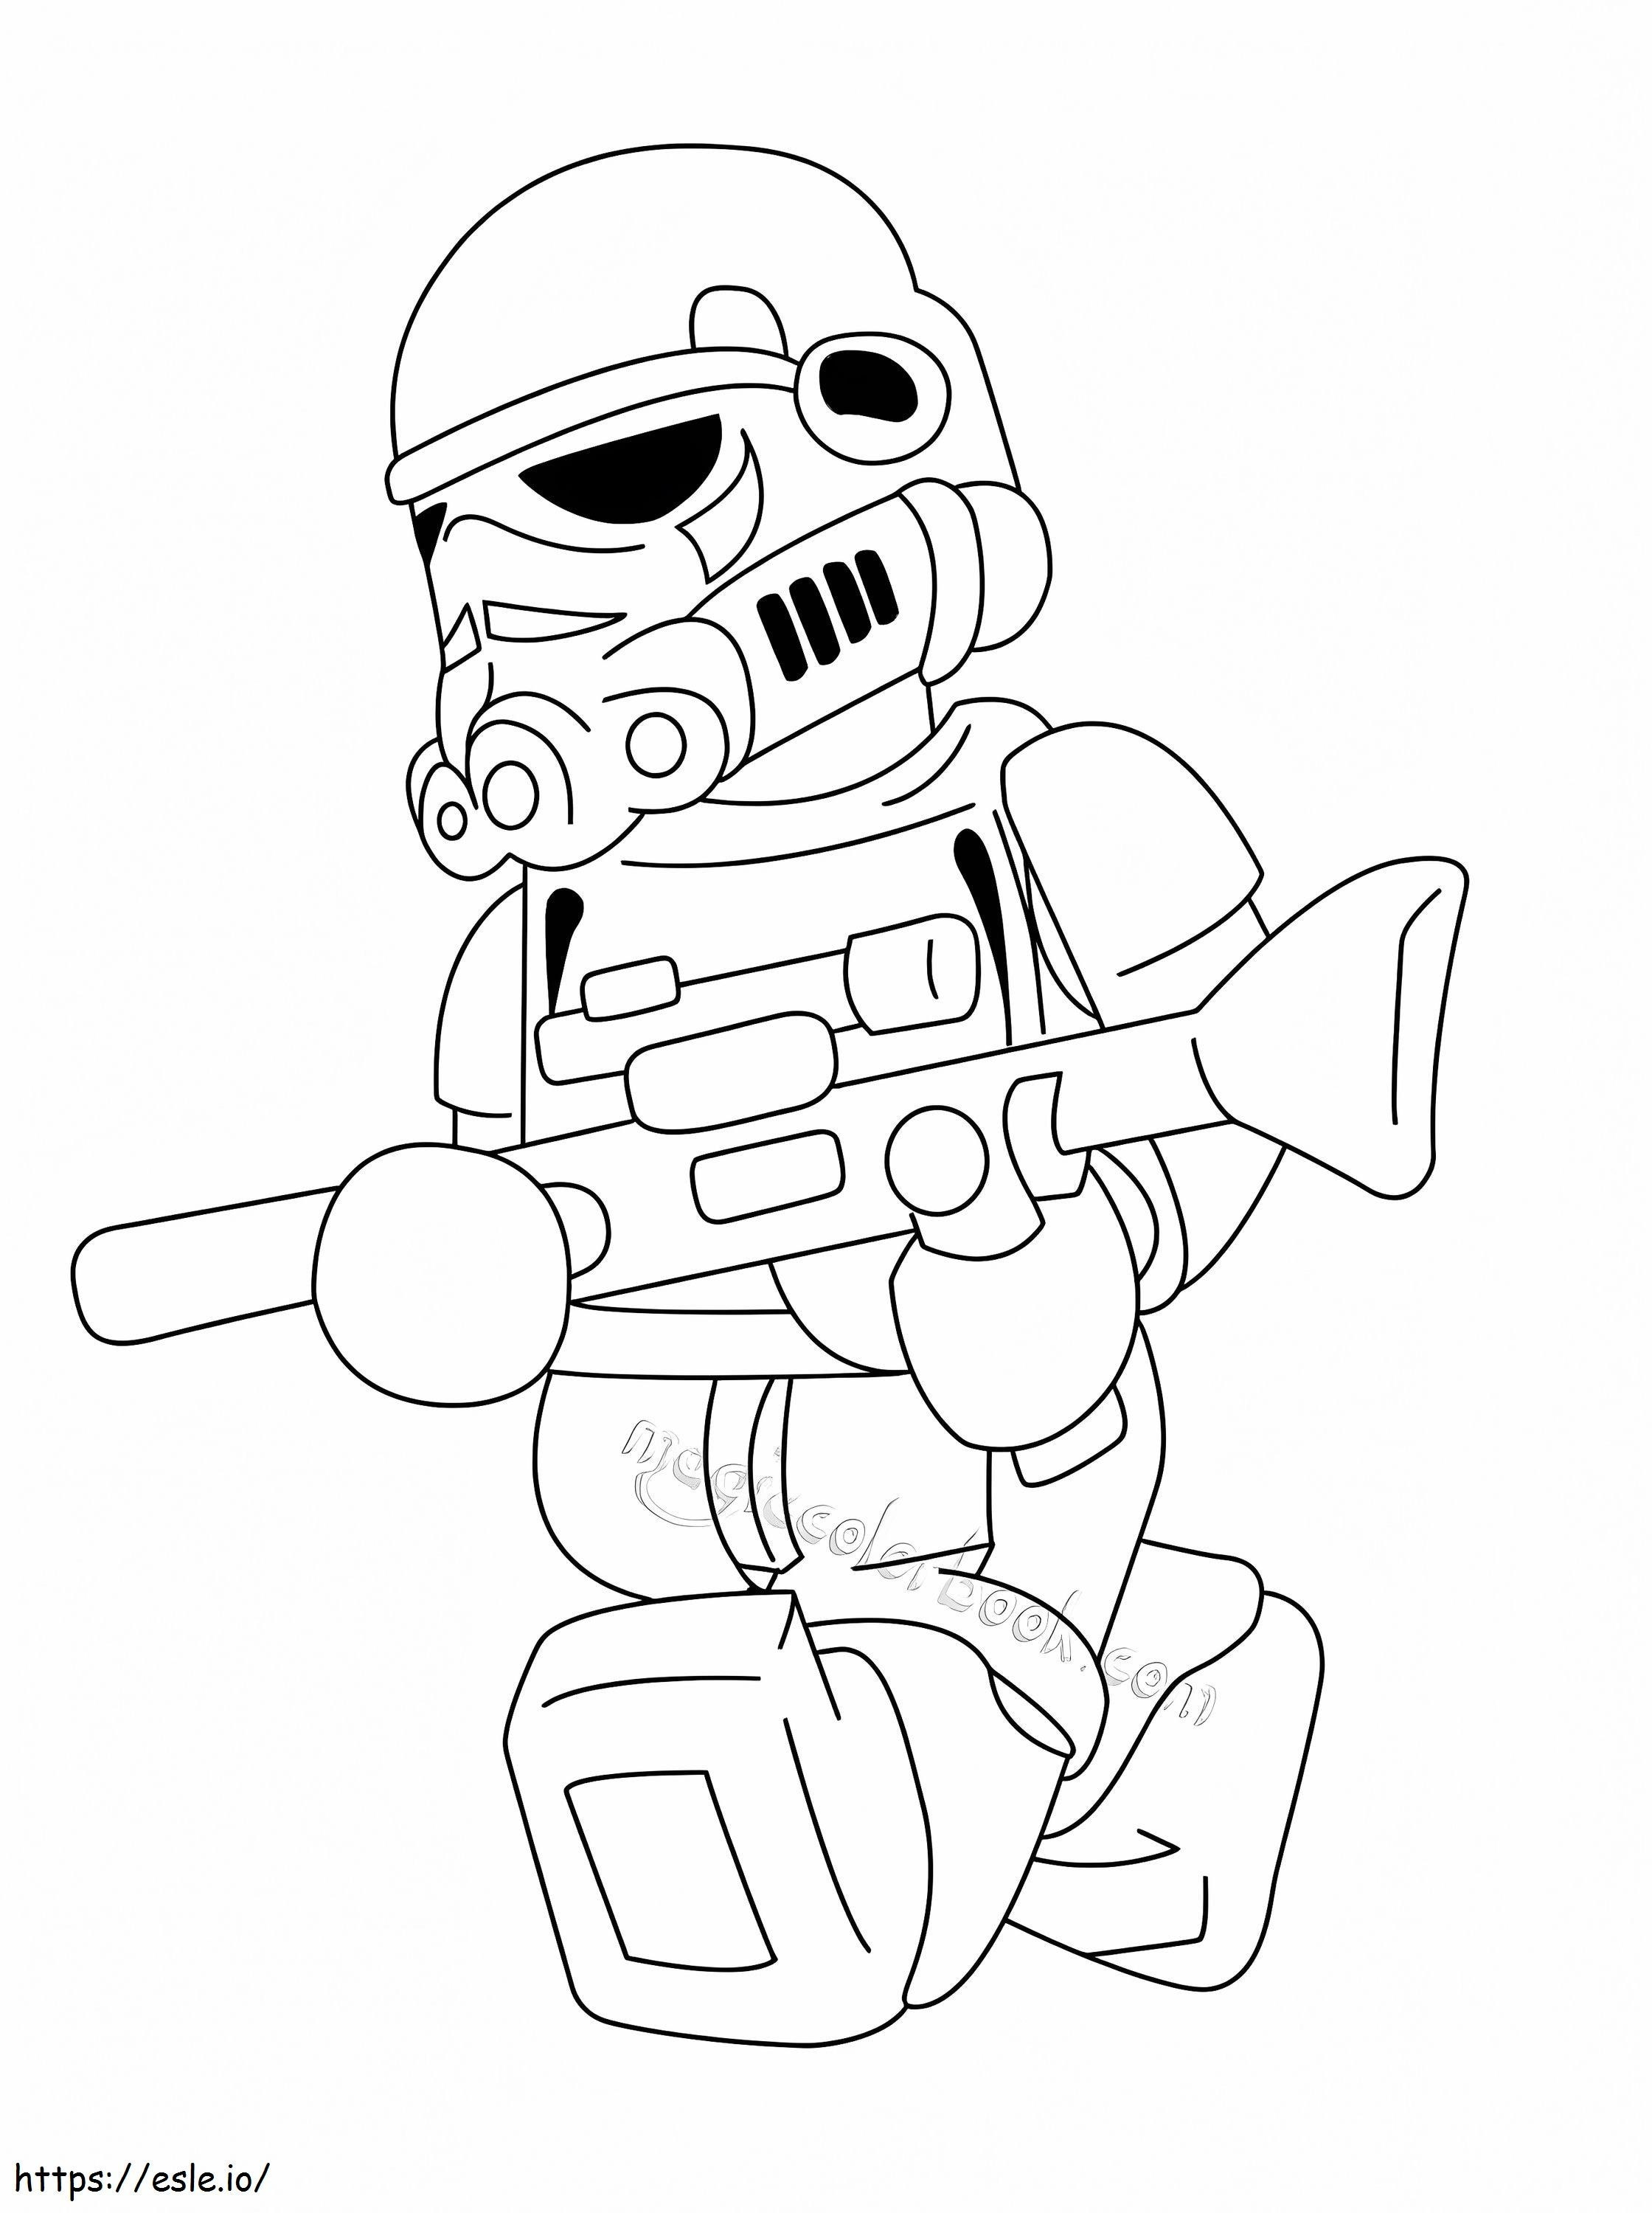 Lego Stormtrooper coloring page